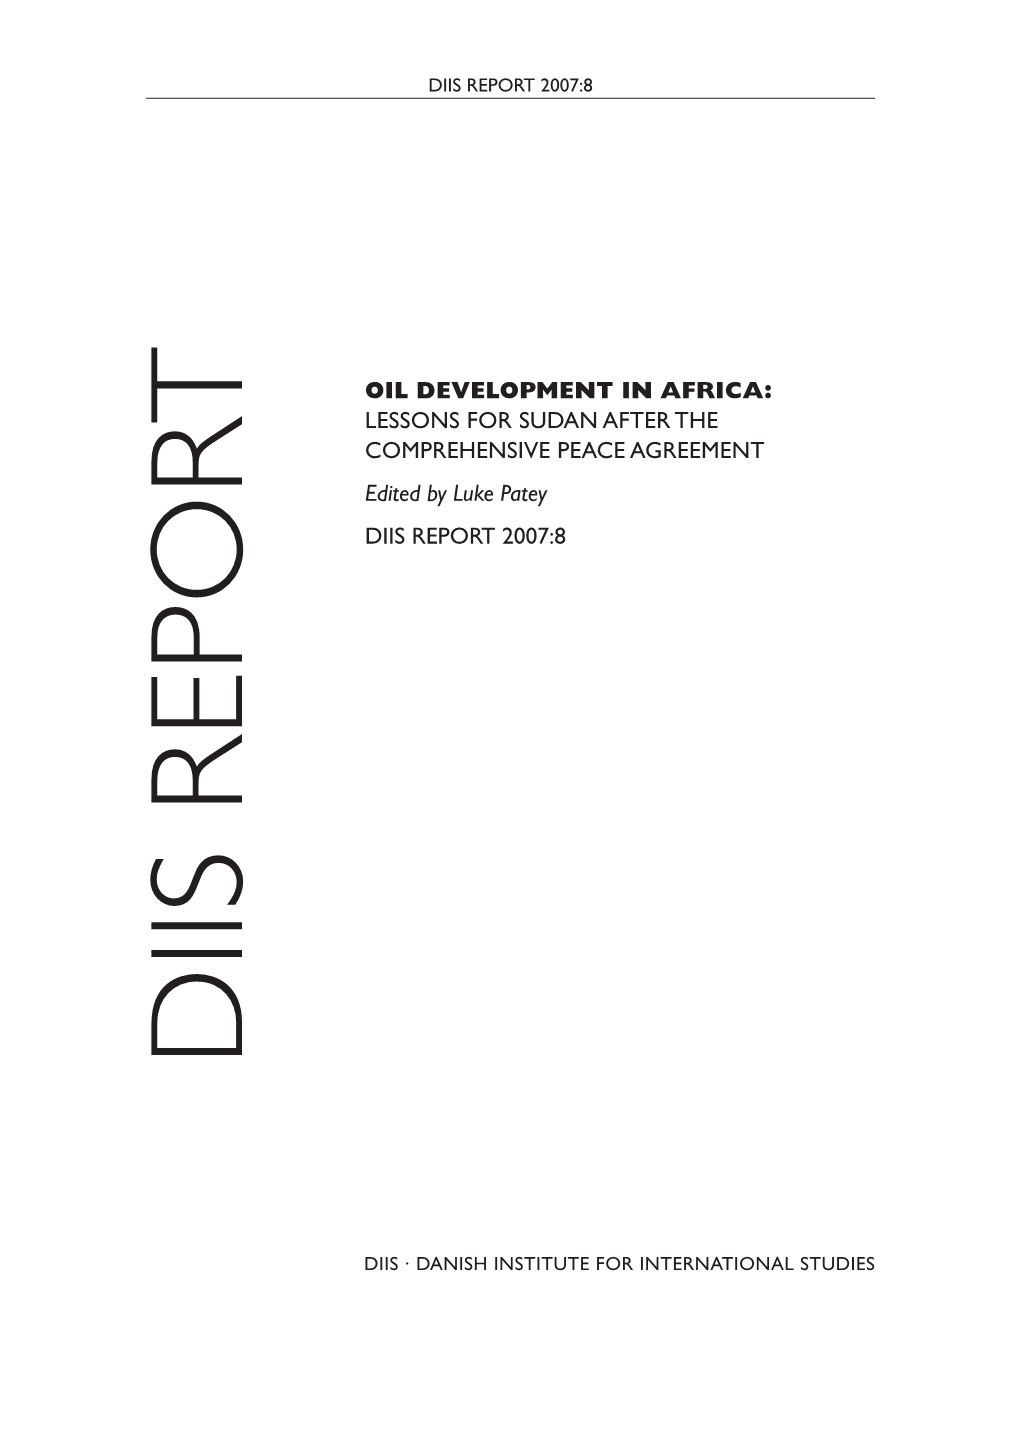 Oil Development in Africa: Lessons for Sudan After the Comprehensive